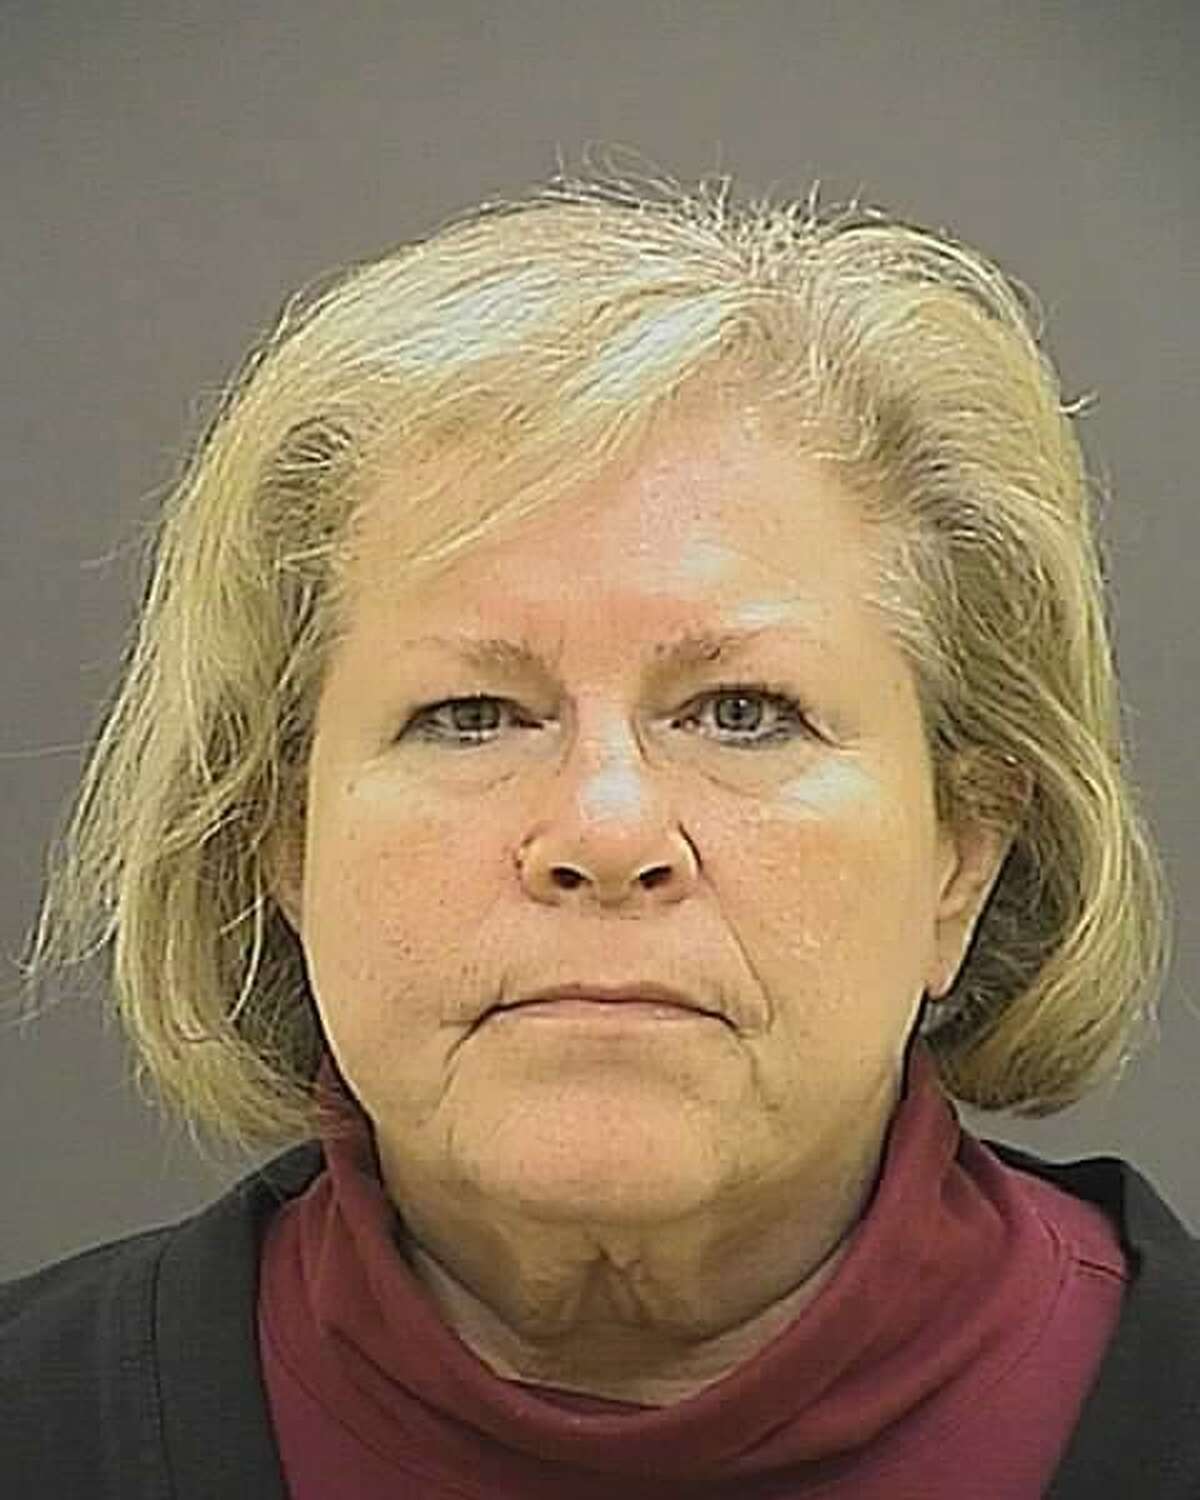 This photo provided by the Baltimore Police Department shows Bishop Heather Cook. Maryland's second-highest ranking Episcopal leader and the first female bishop in her diocese was charged with drunken driving and manslaughter after fatally striking a cyclist in late December. Cook, 58, turned herself in to authorities Friday, Jan. 9, 2015, according to her attorney, David Irwin. Online court records show Cook's bail was set at $2.5 million. A trial is scheduled for Feb. 6. (AP Photo/ Baltimore Police Department)